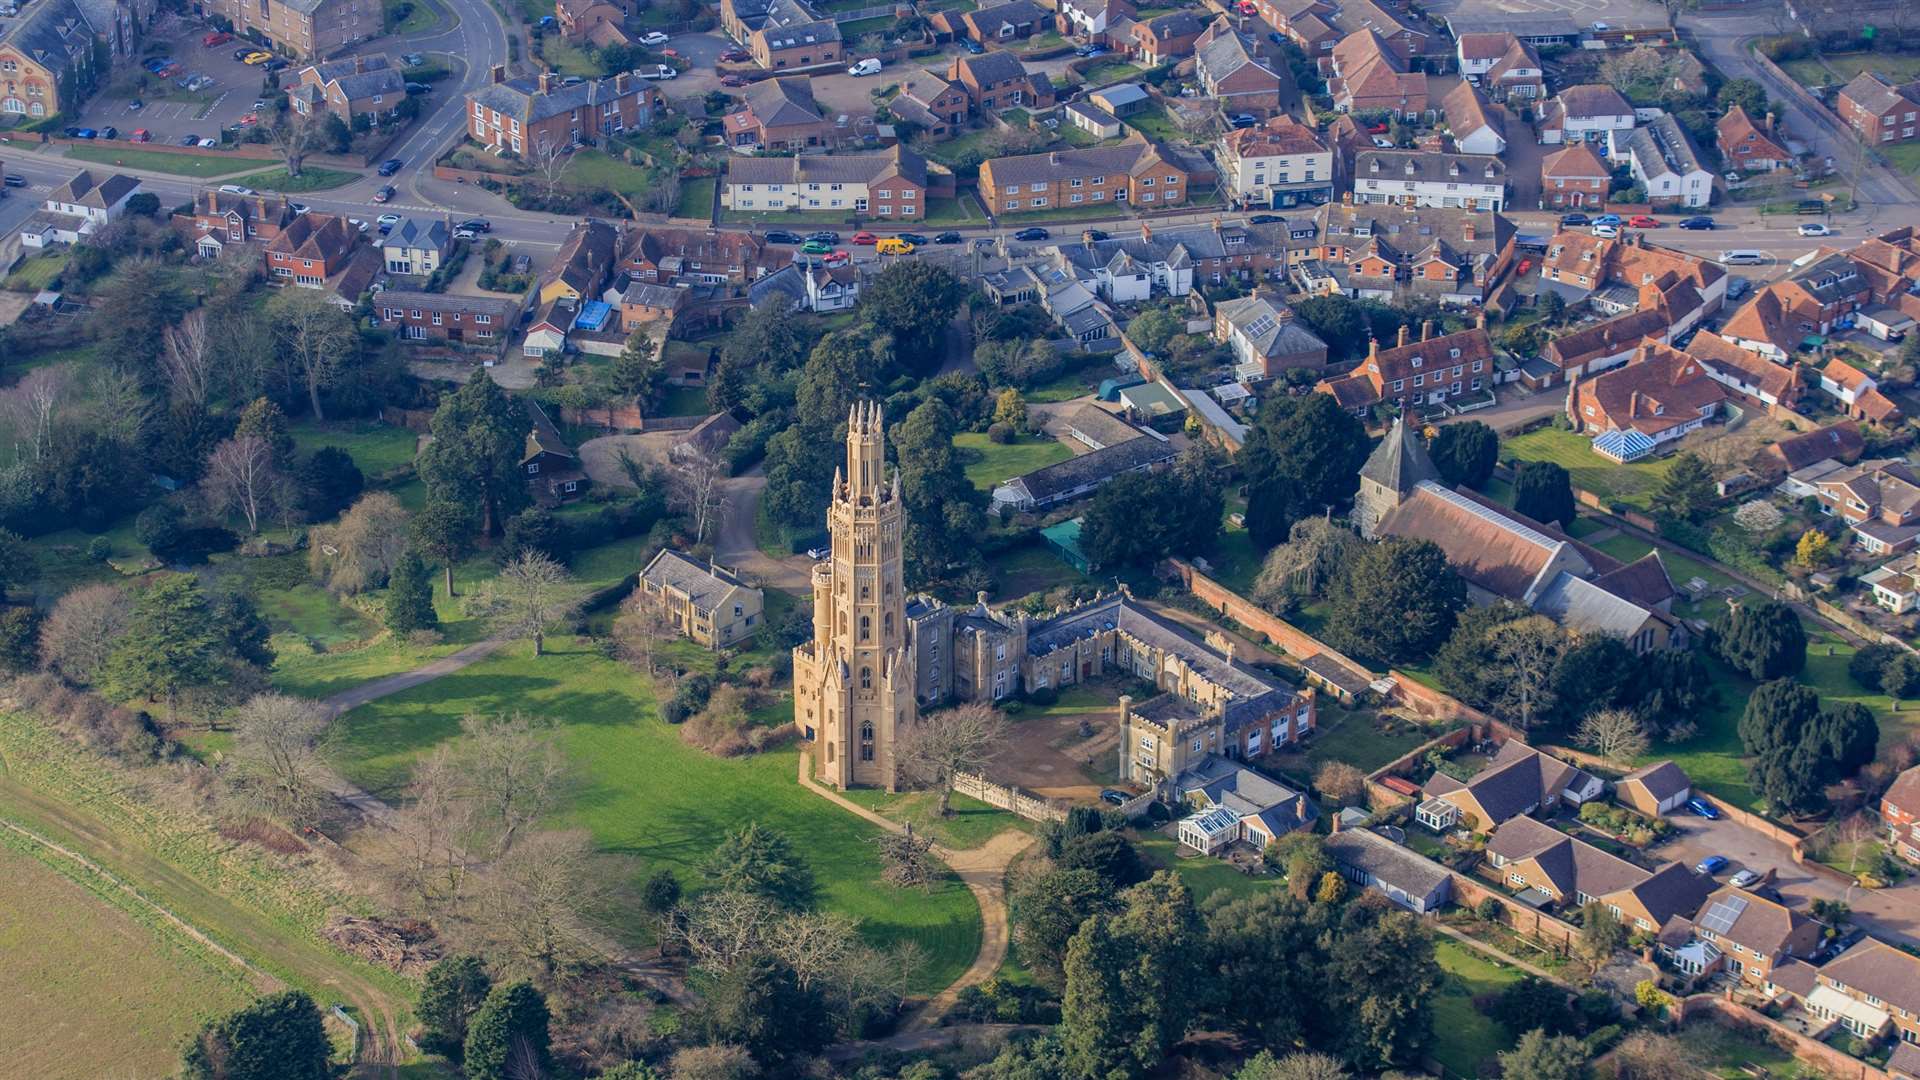 An aerial view of the tower